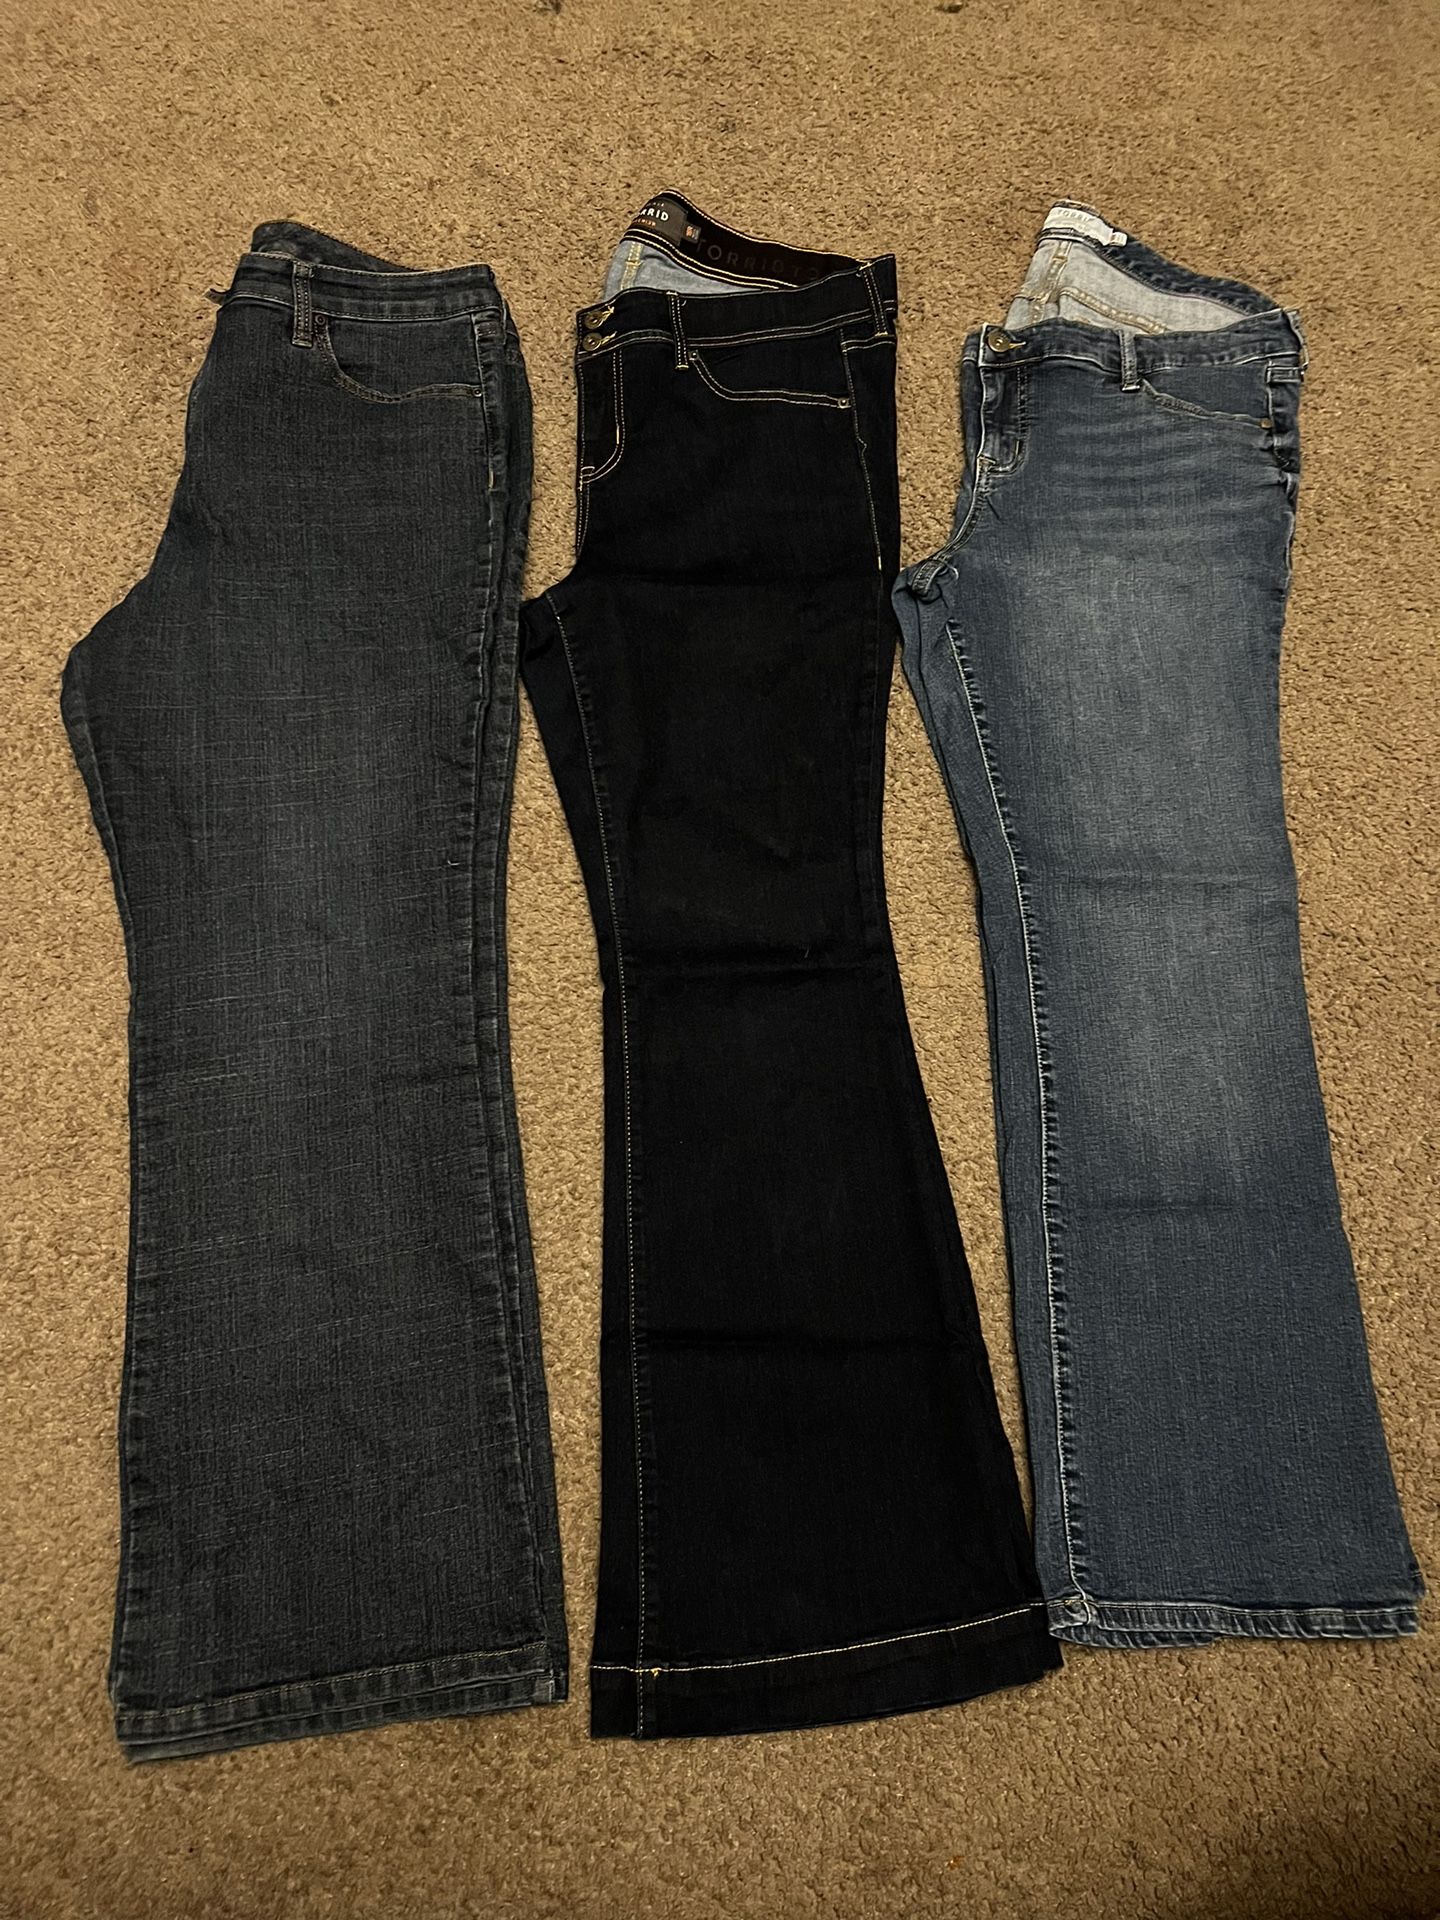 Womens Size 18 Jeans 